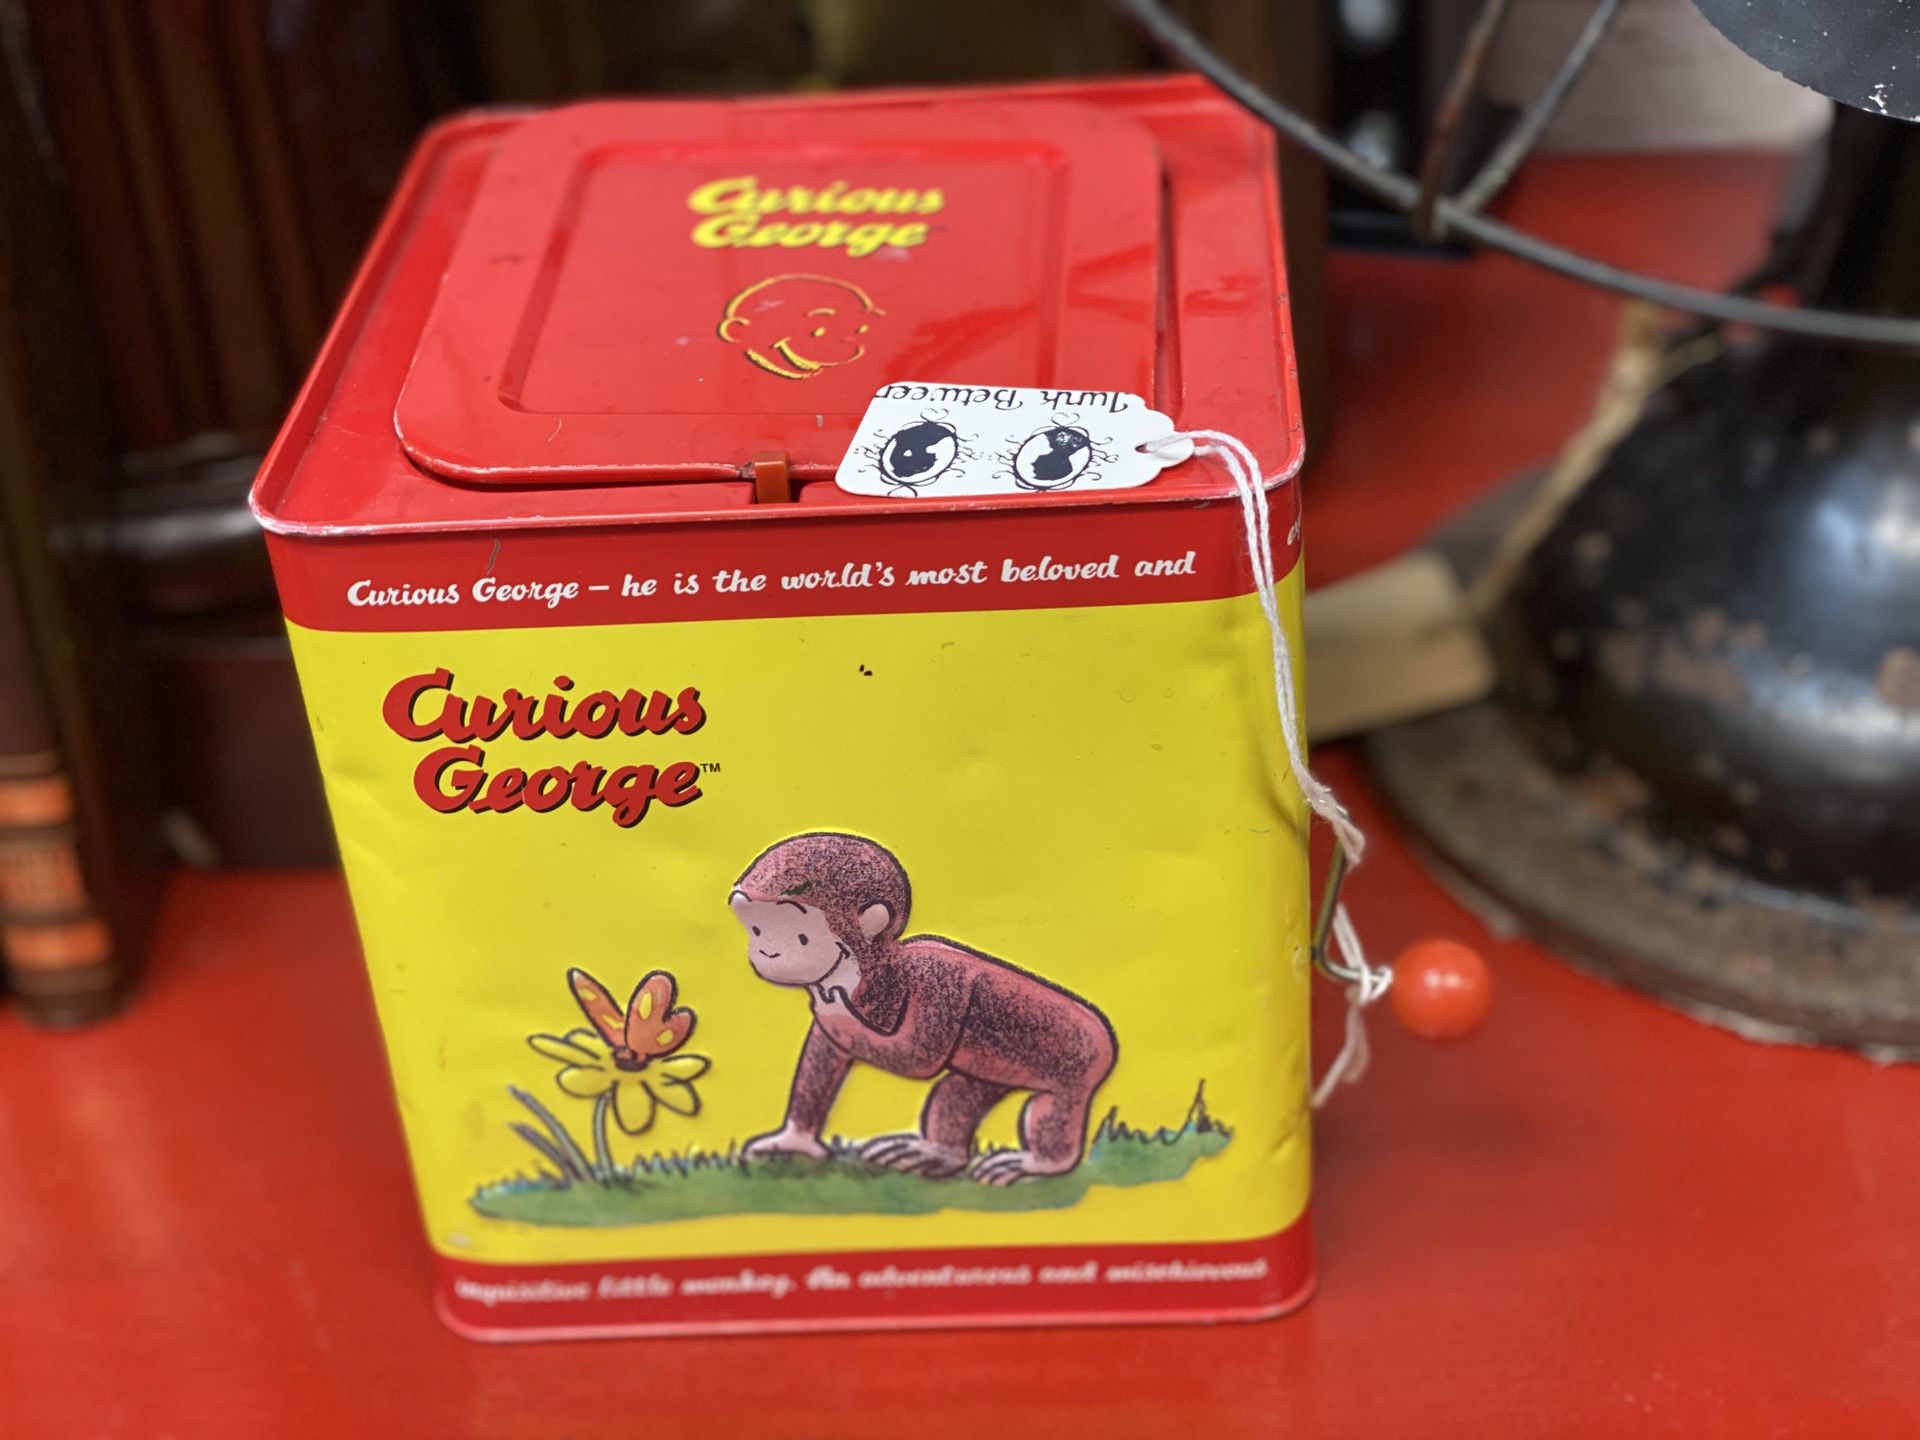 Curious George Antique collectible toy